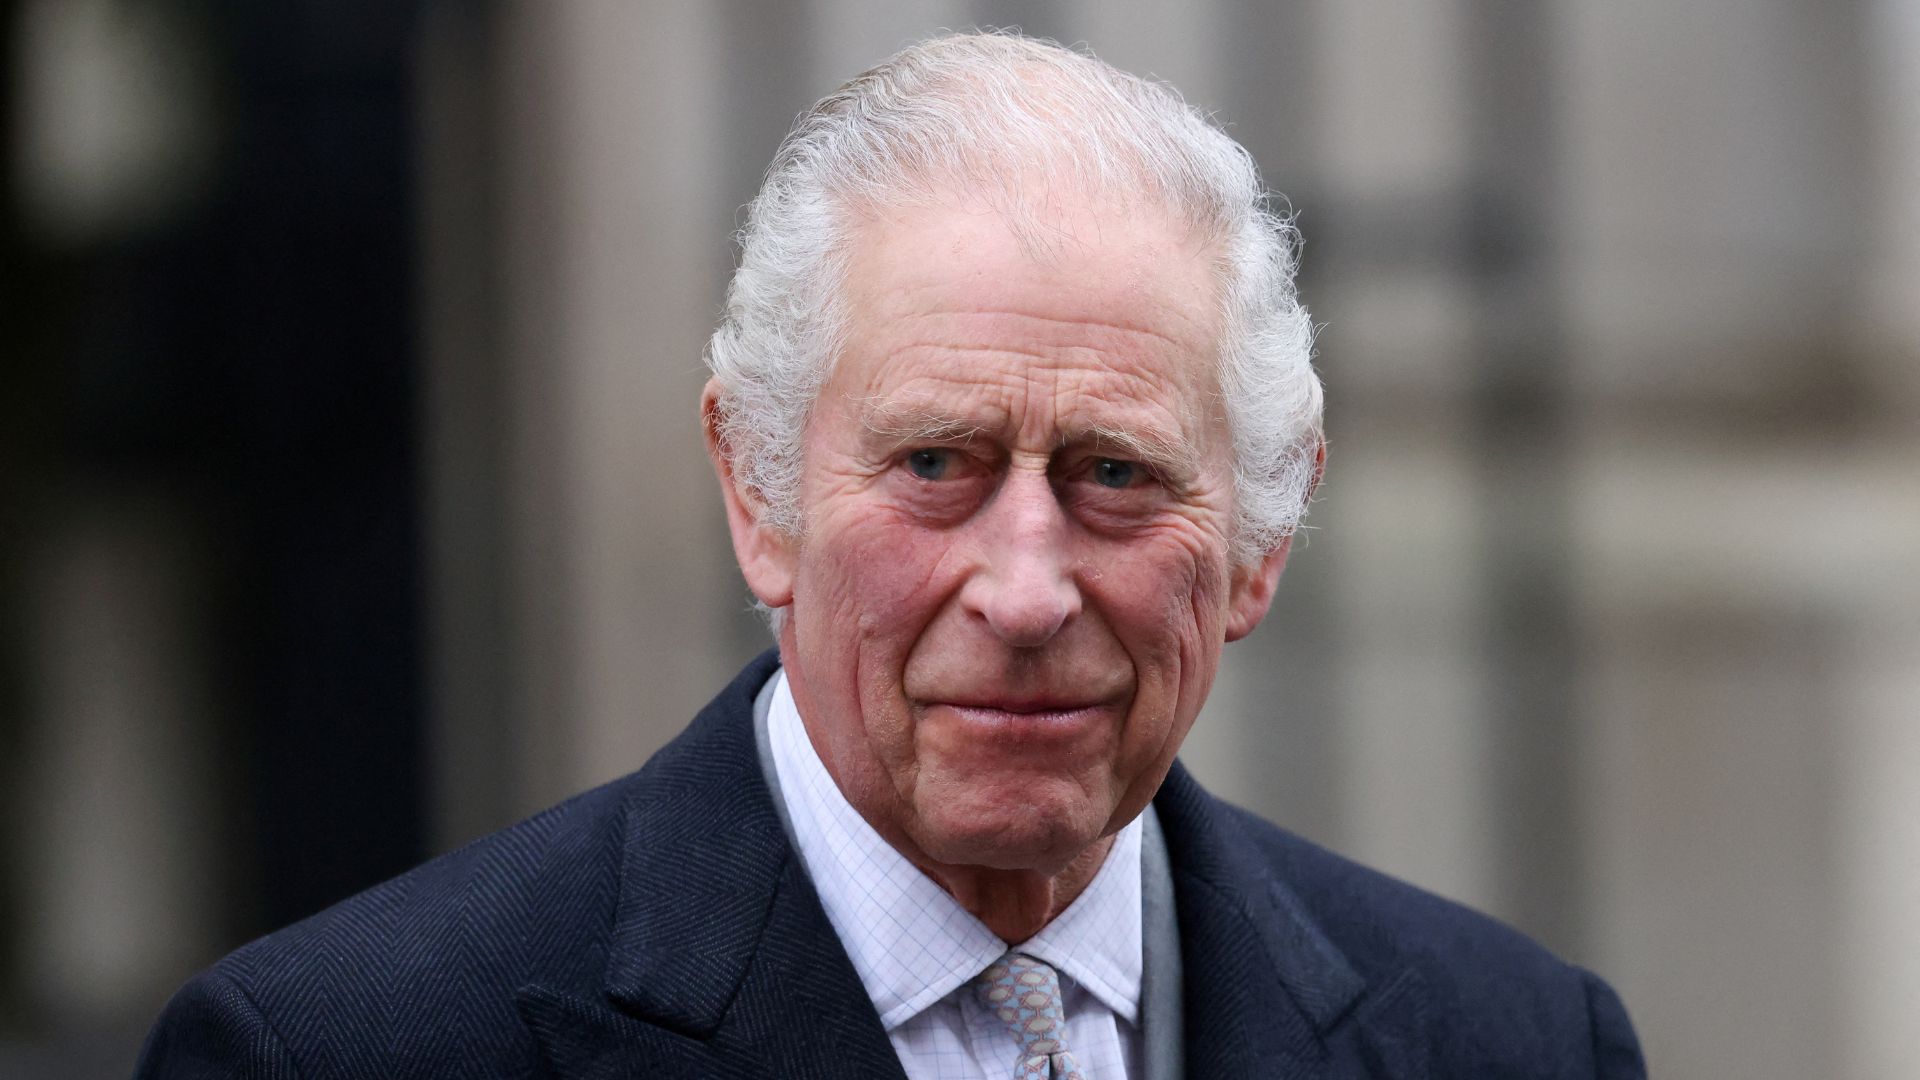 King Charles leaves the London Clinic after receiving treatment for an enlarged prostate on January 29. /Toby Melville/Reuters